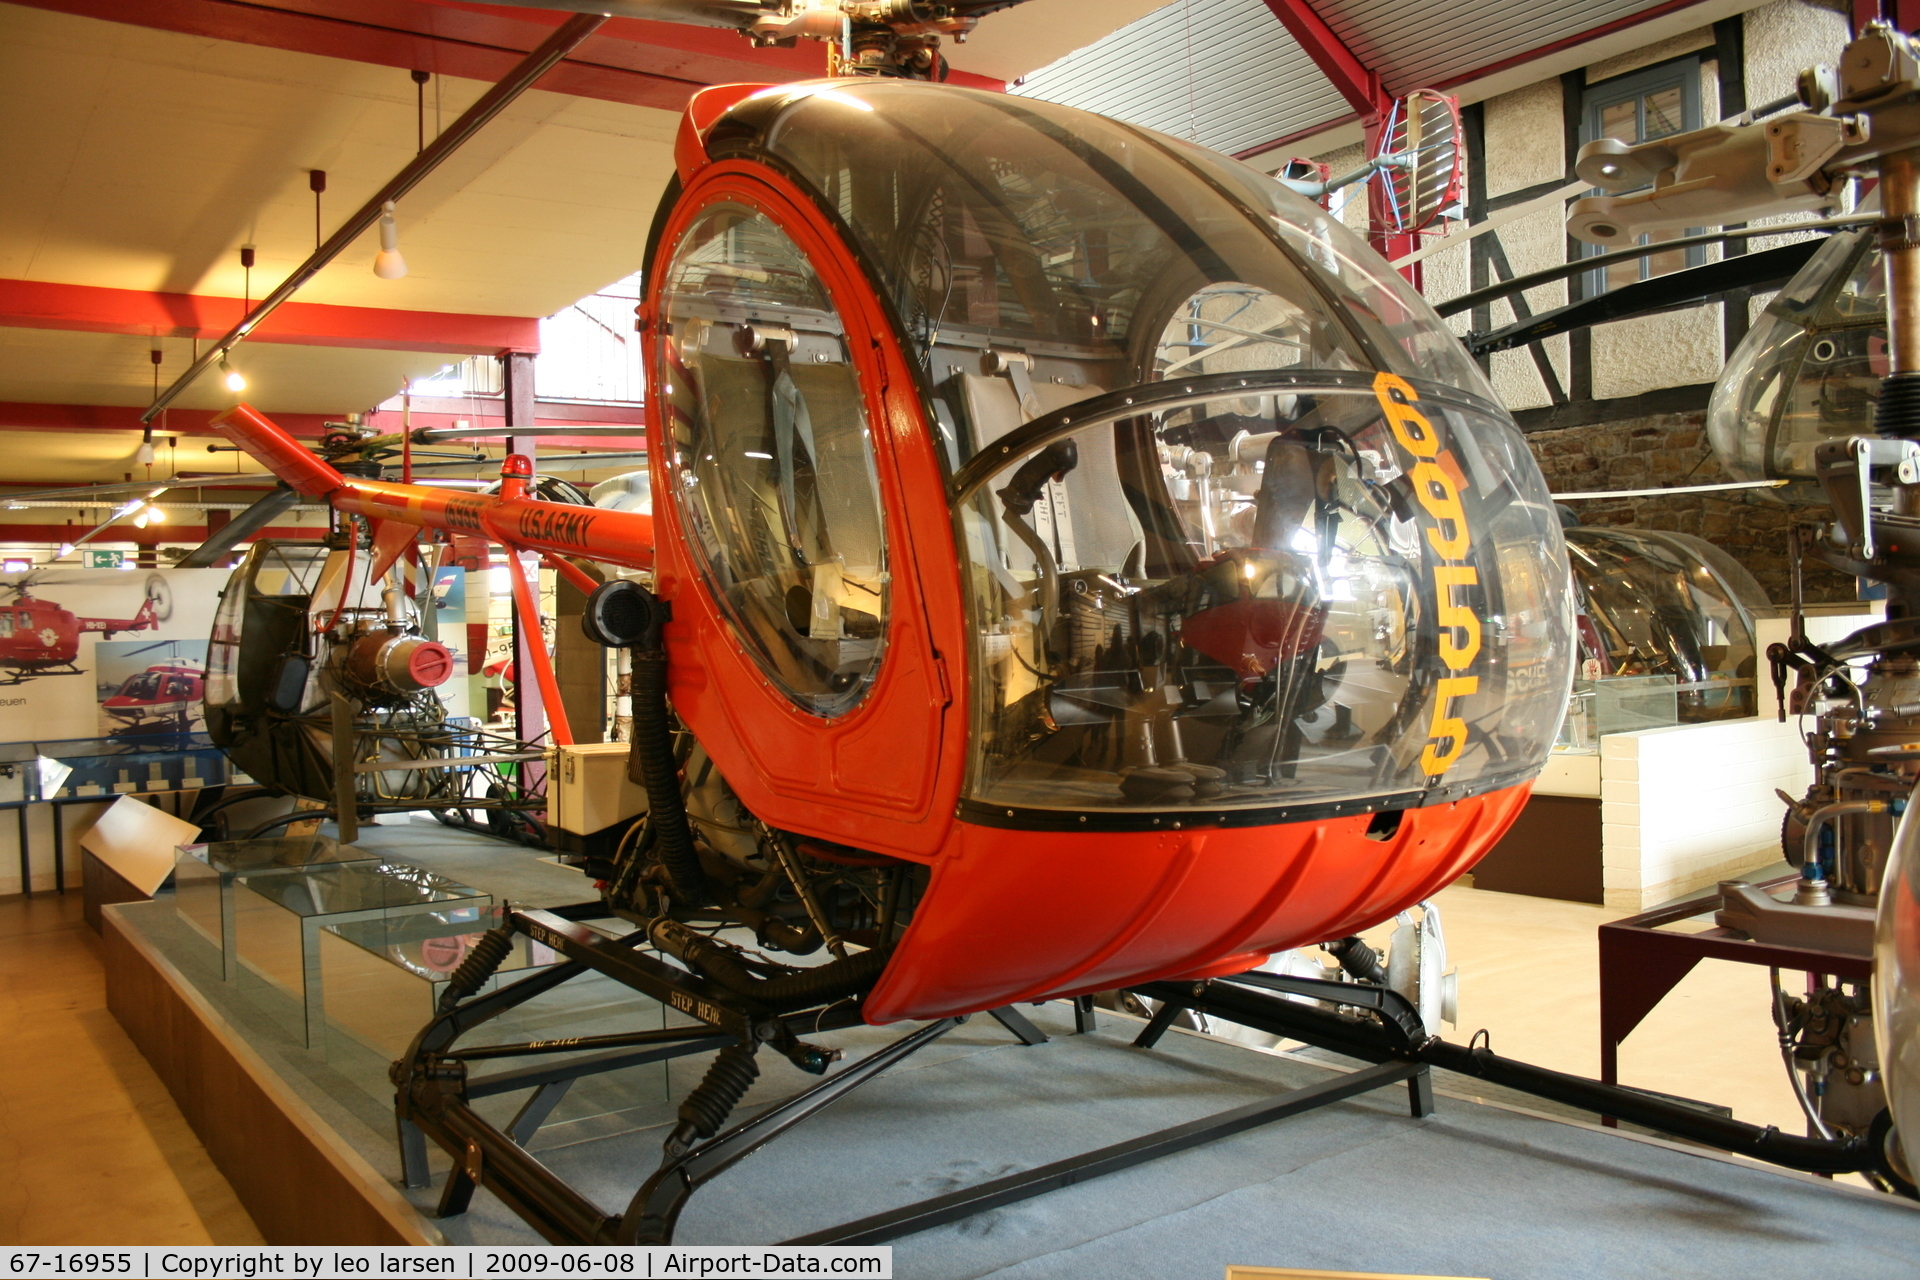 67-16955, 1967 Hughes TH-55A Osage C/N 19-1062, Bückeburg Helikopter museum 8.6.2009